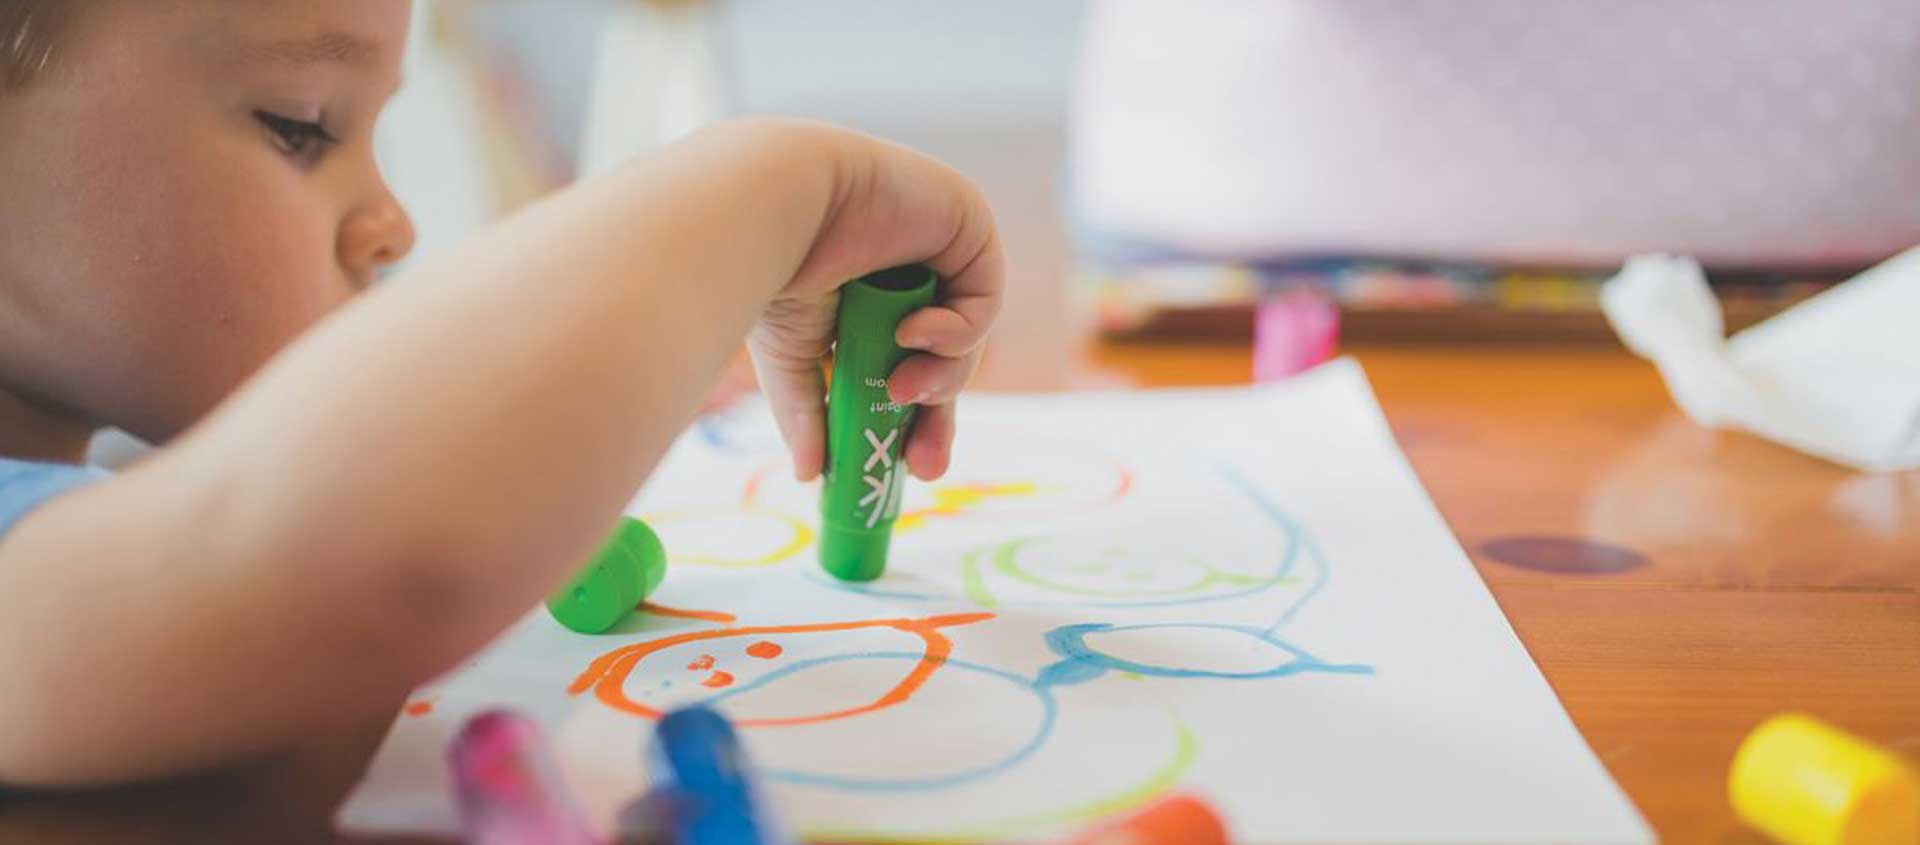 A preschooler uses a marker to draw.